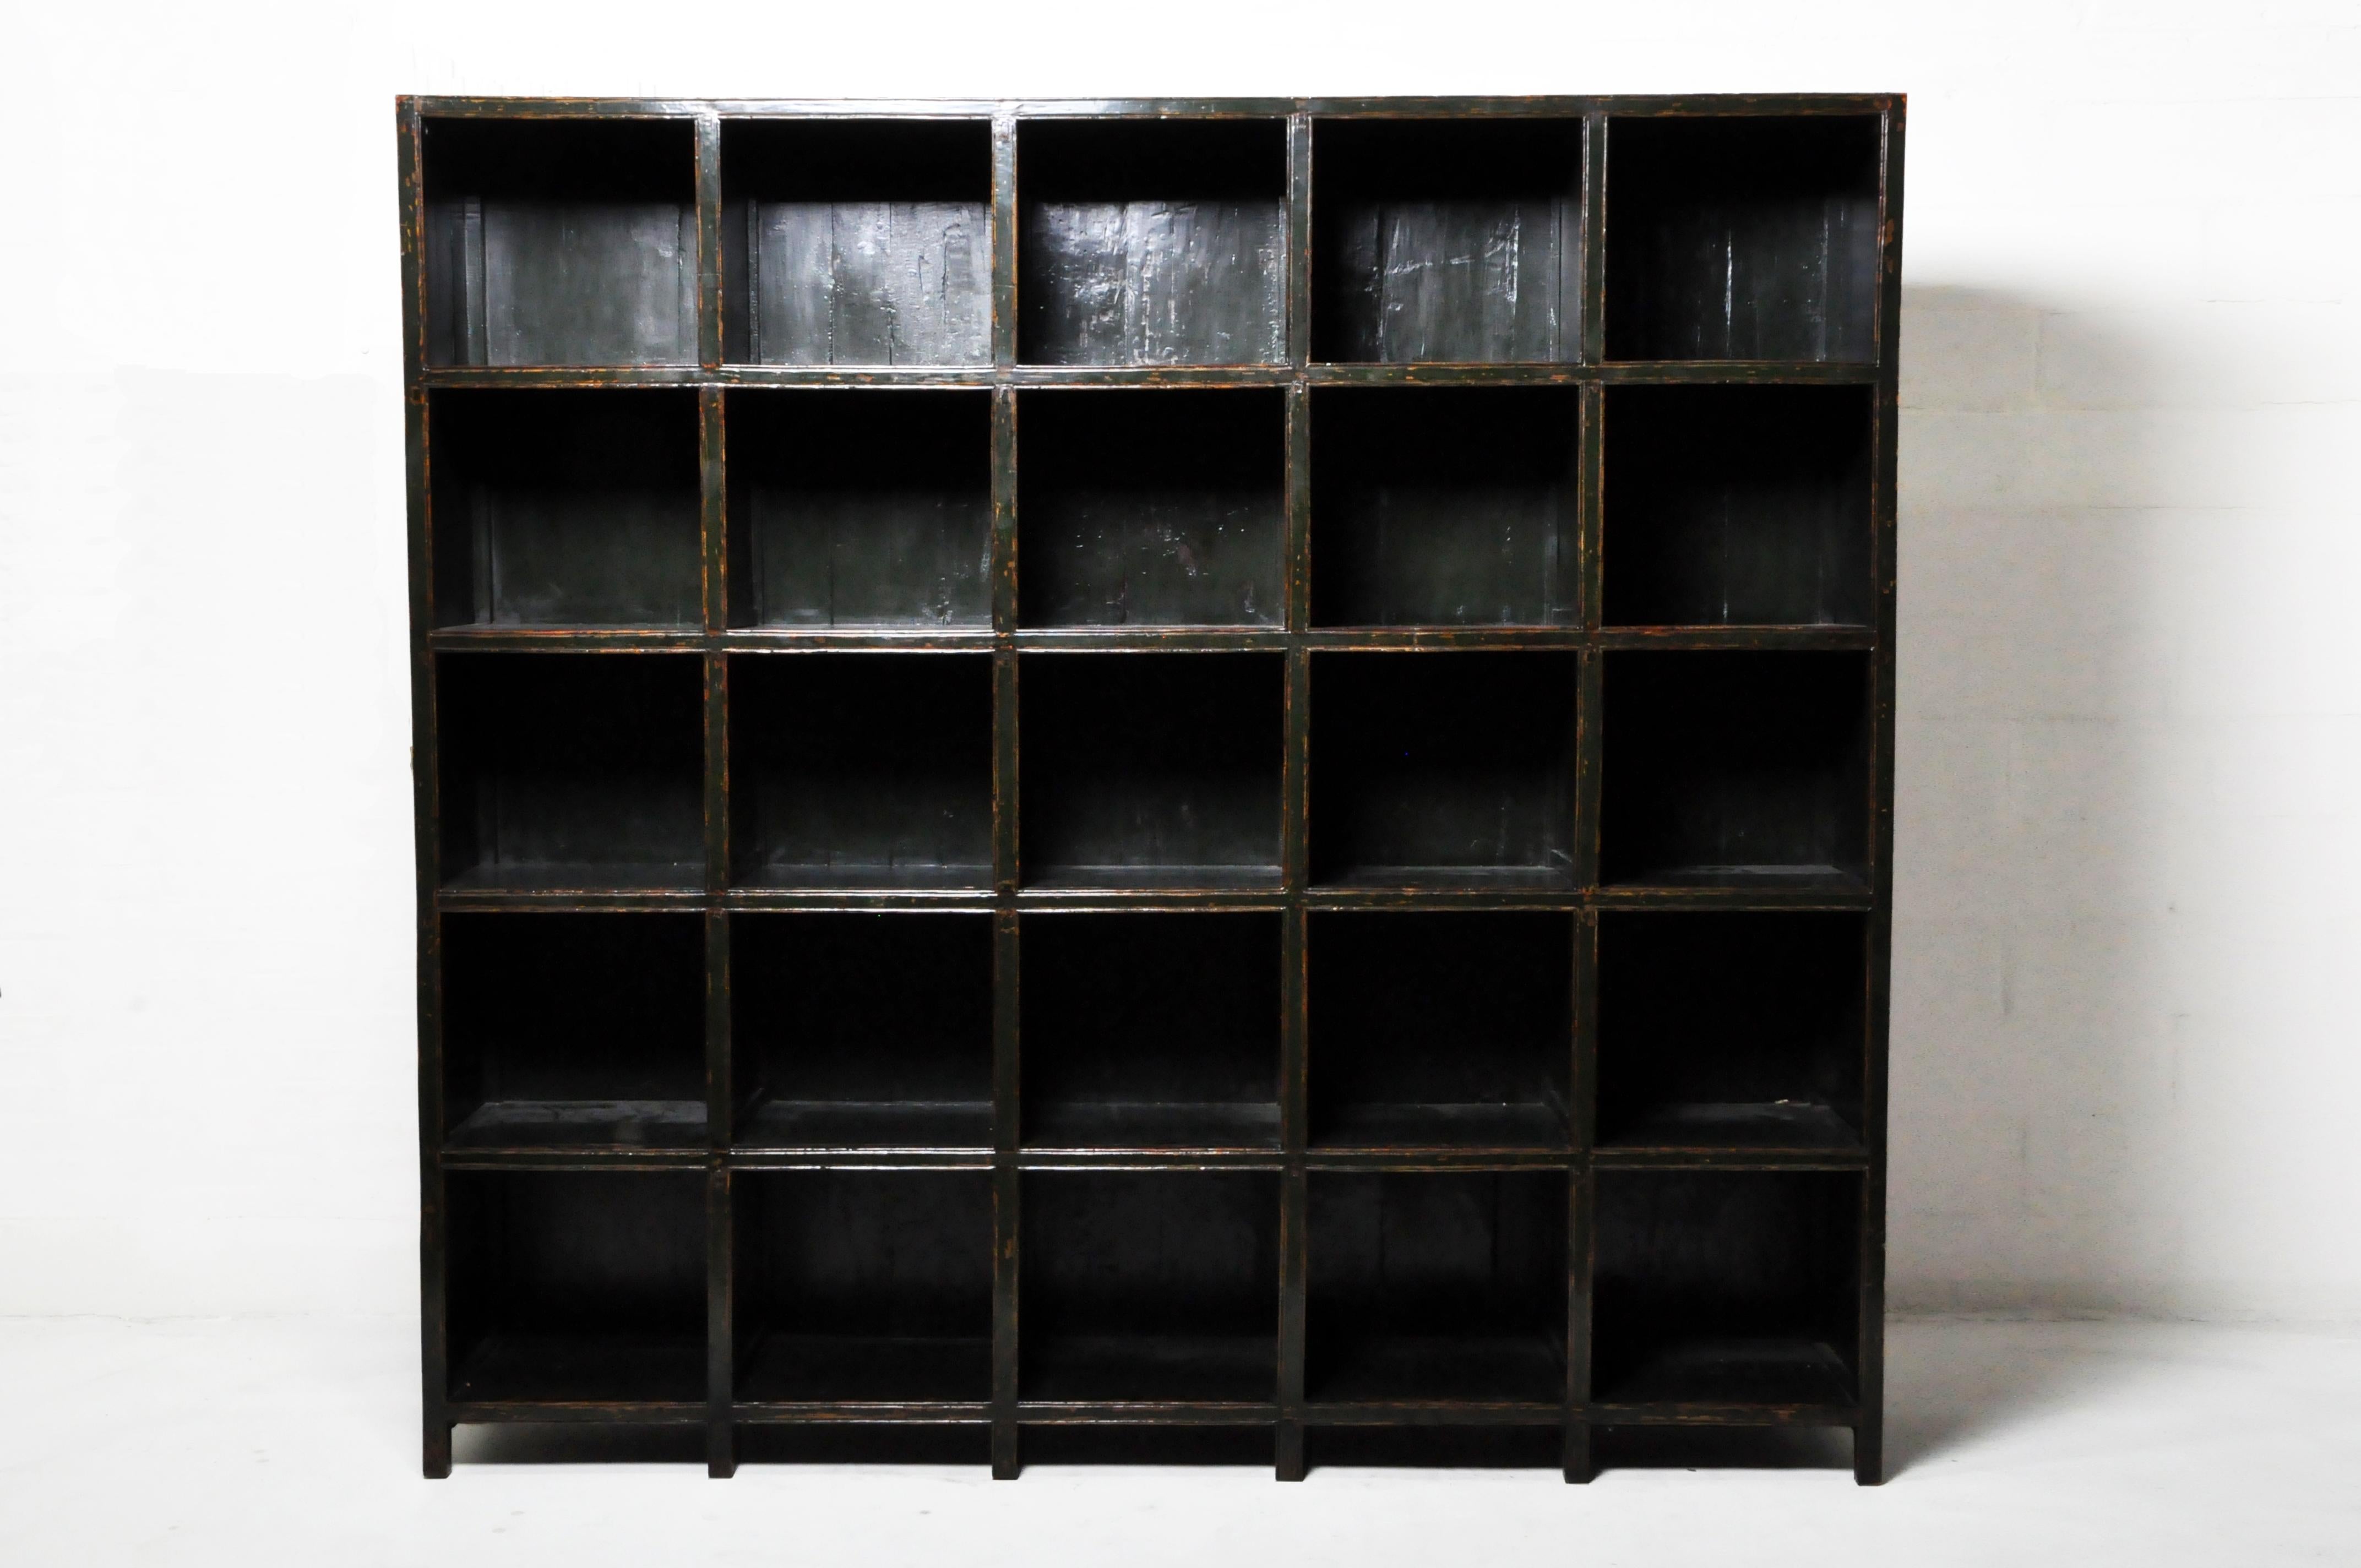 Chinese scholars, aristocrats, and wealthy merchants collected books and historical objects and placed them in a room dedicated to calligraphy and contemplation. This simple bookshelf was once placed in such a room, adjacent to an outdoor courtyard.